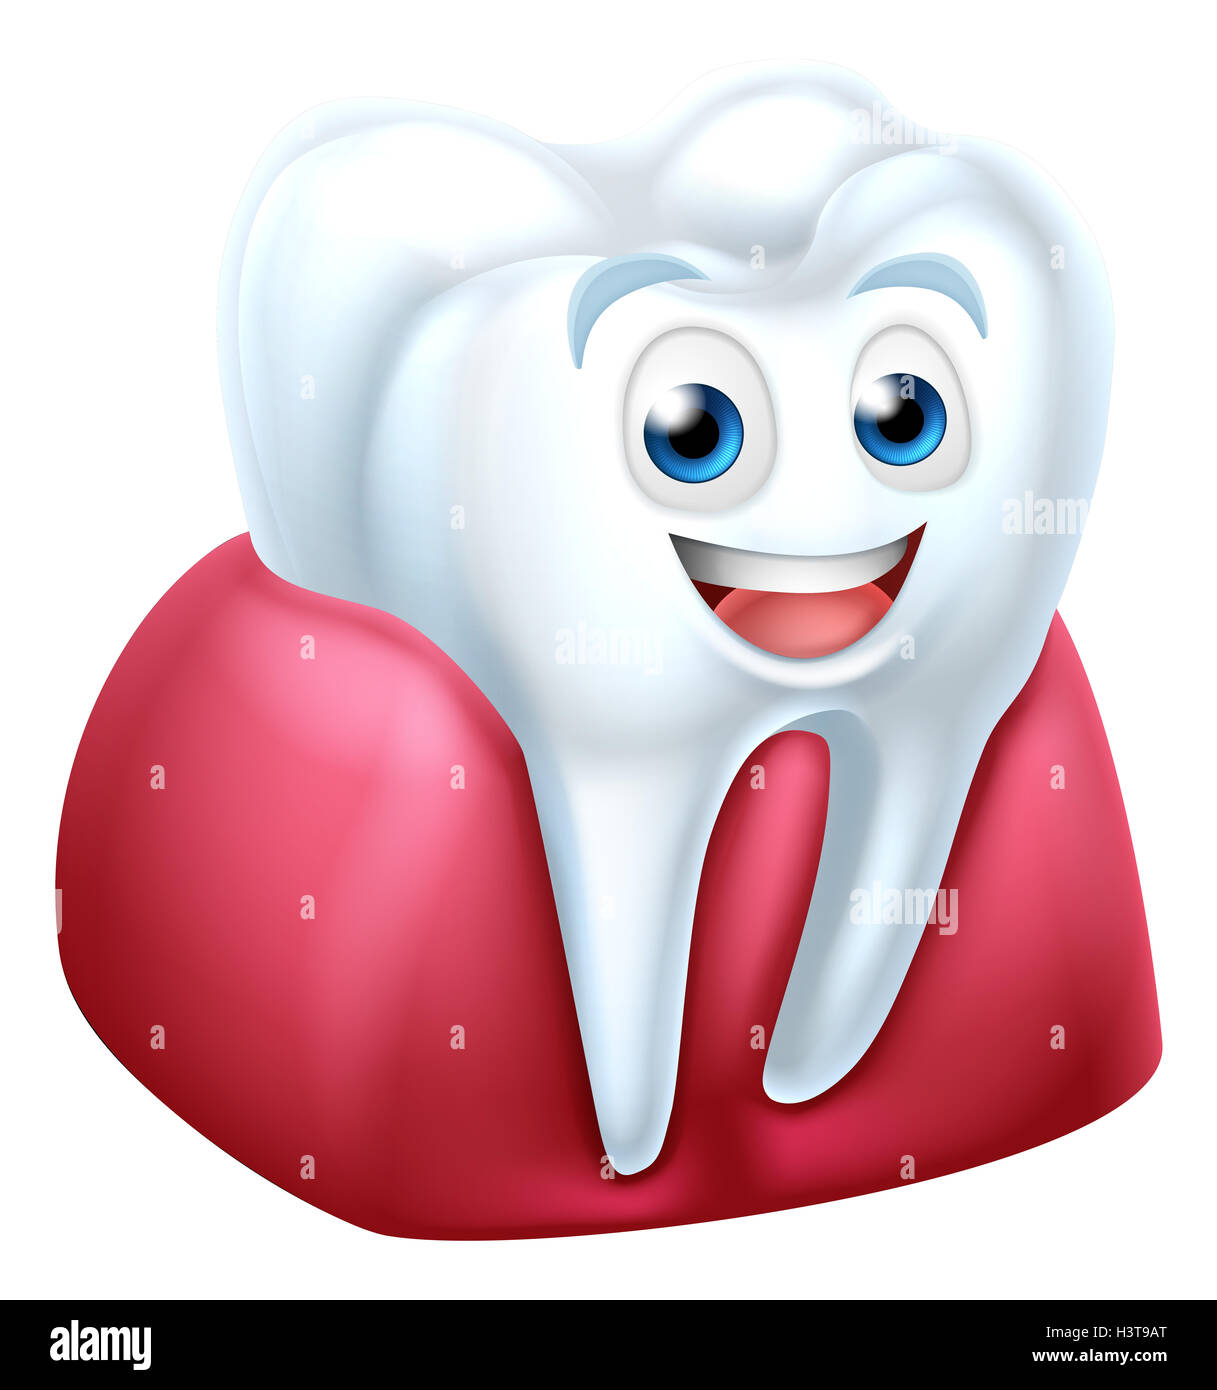 Cute tooth dentists mascot cartoon character and gum Stock Photo